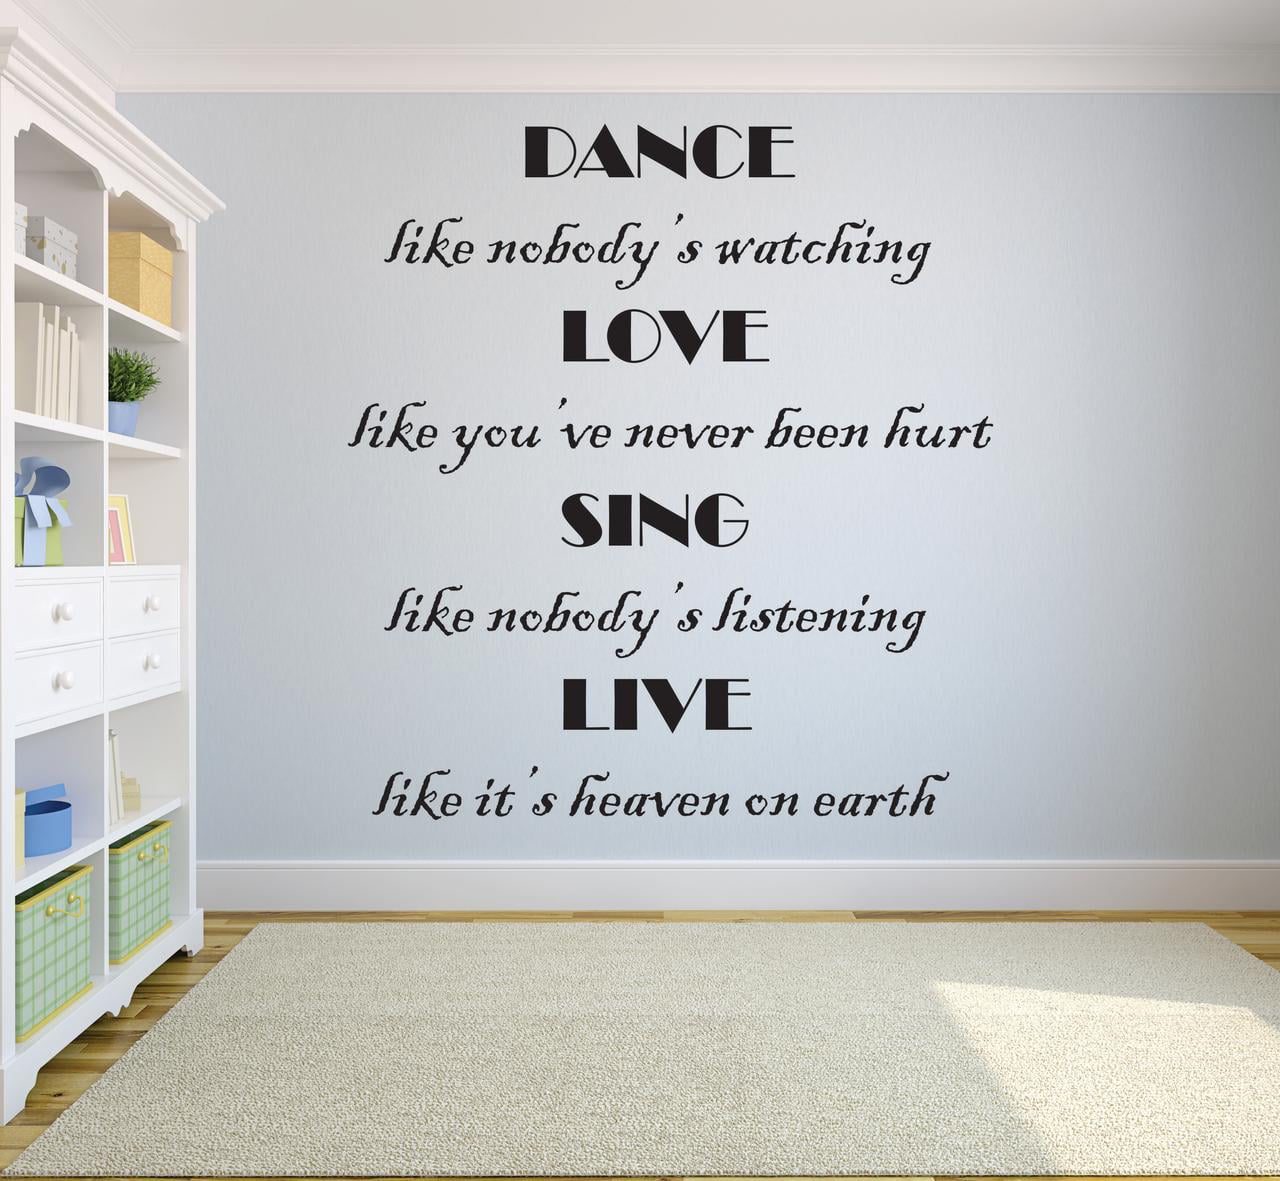 Dance like no-one is watching wall sticker decal 